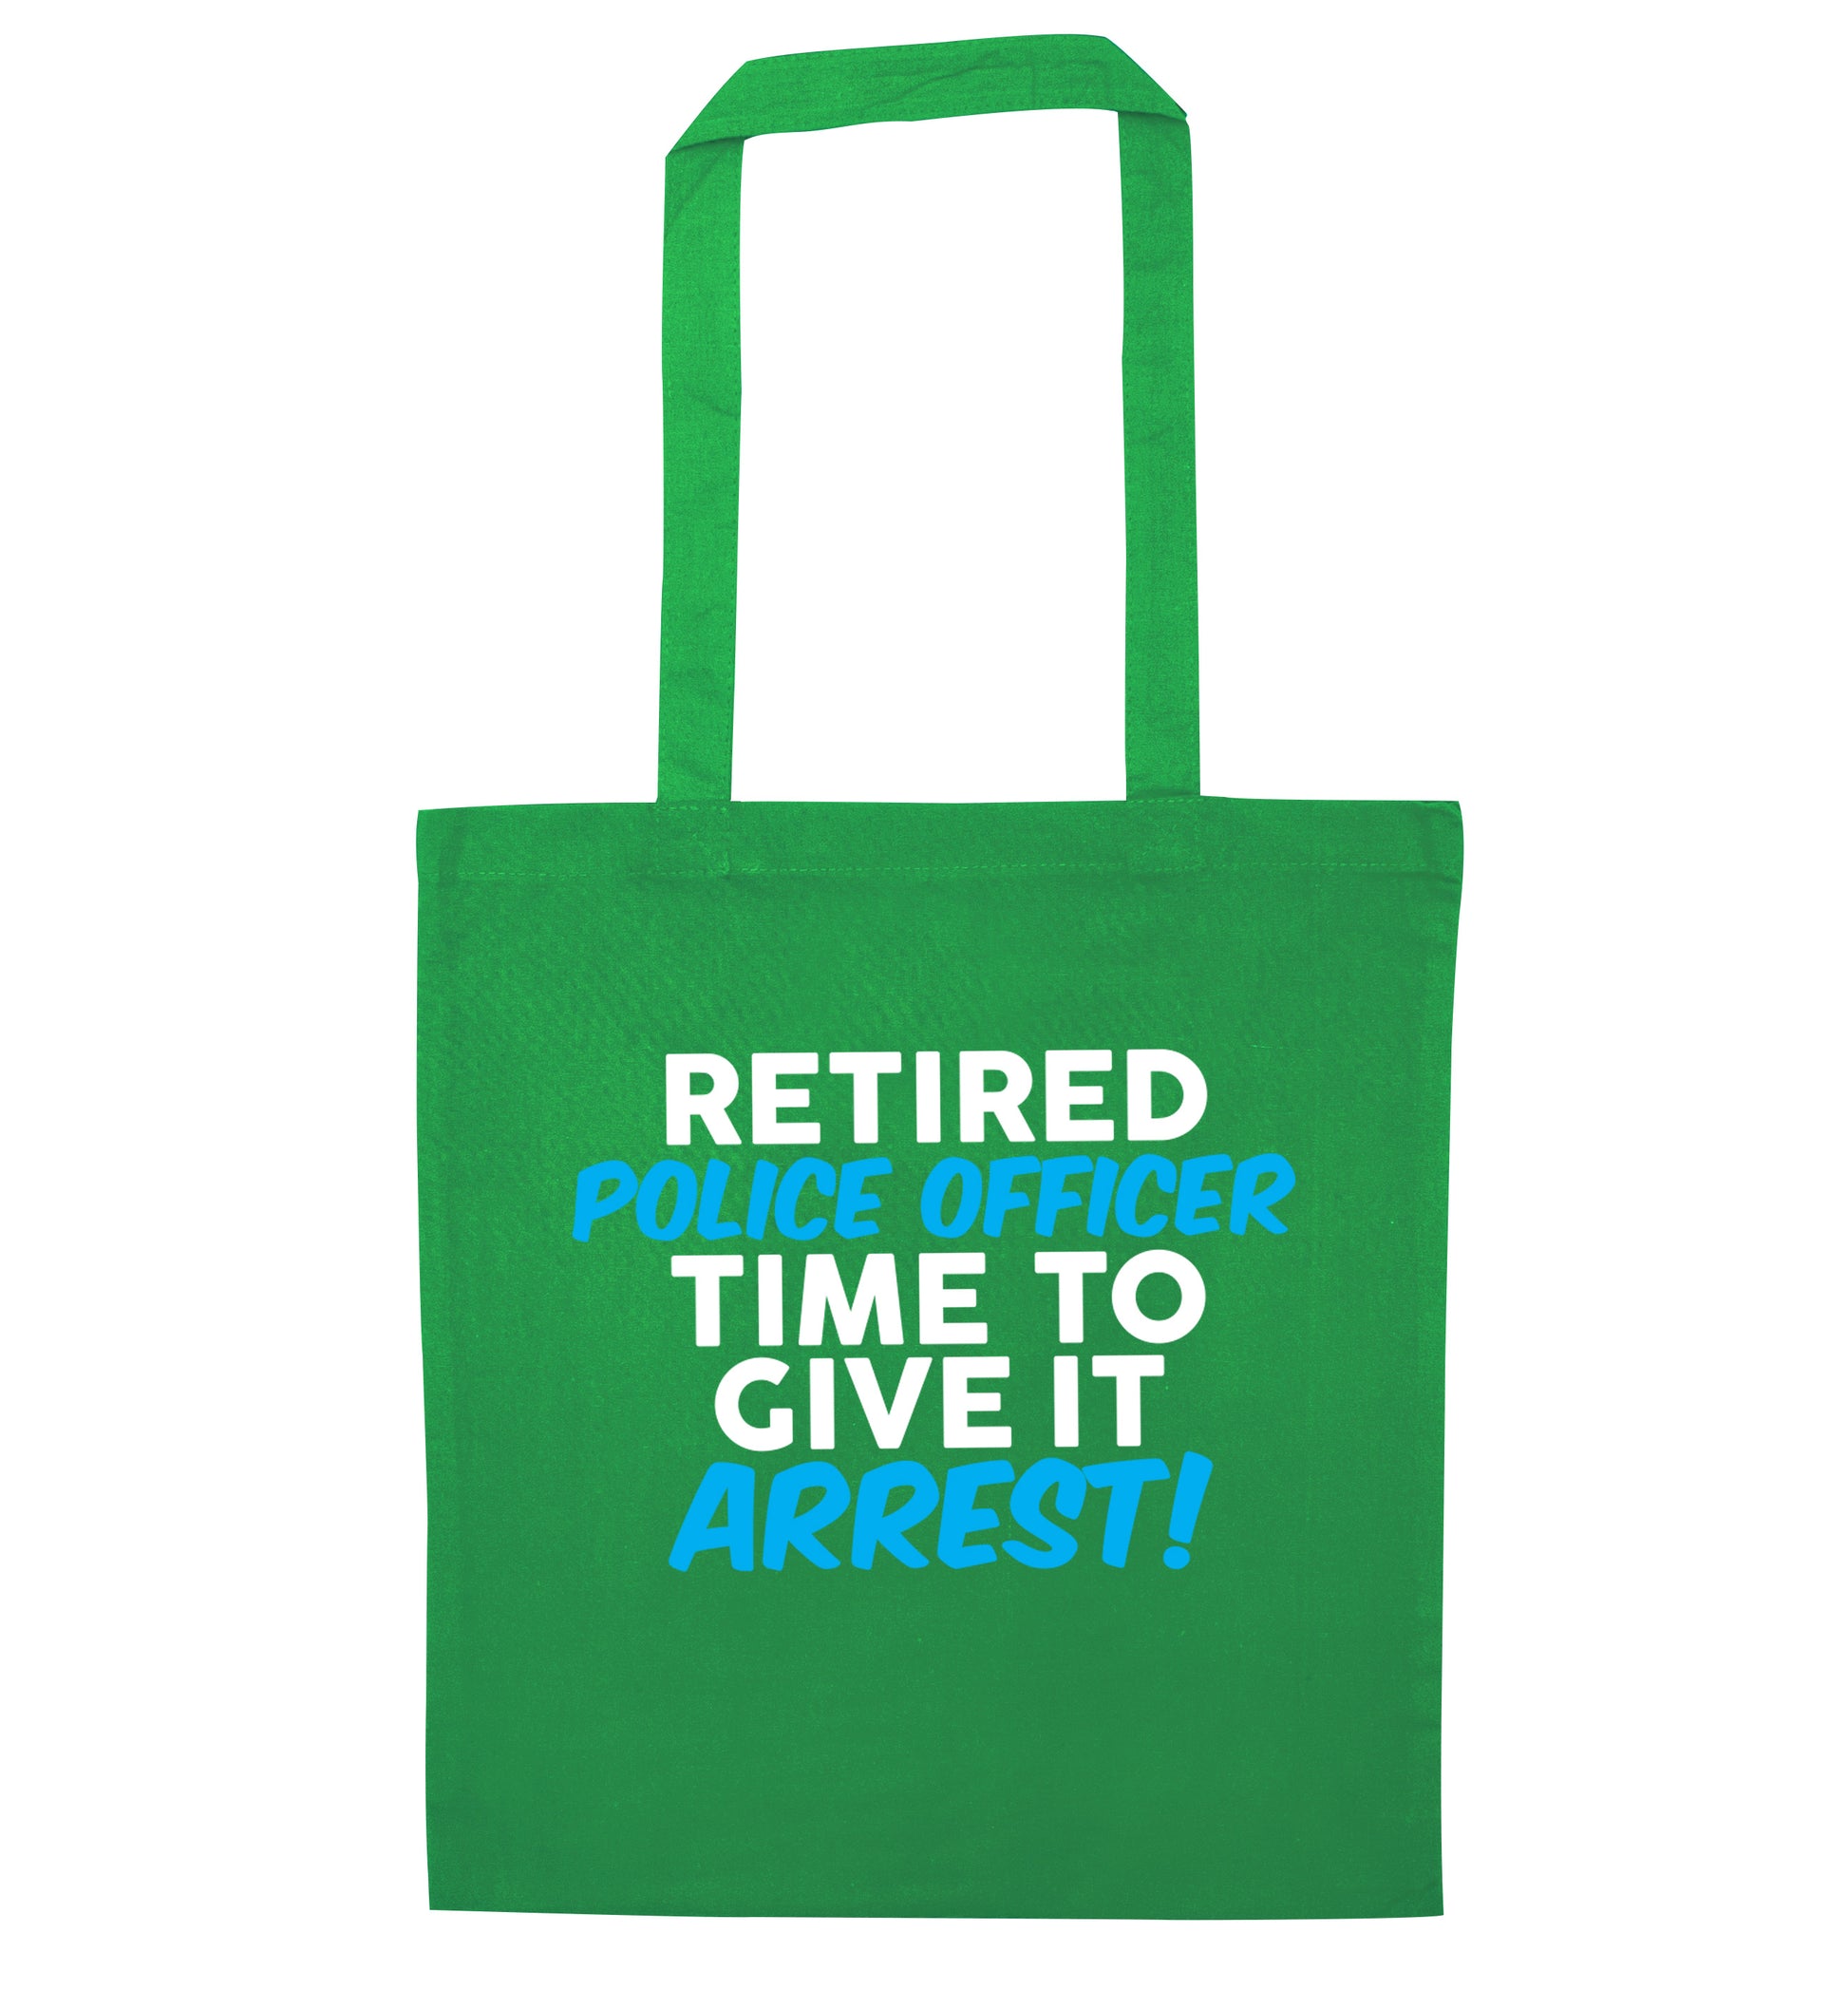 Retired police officer time to give it arrest green tote bag